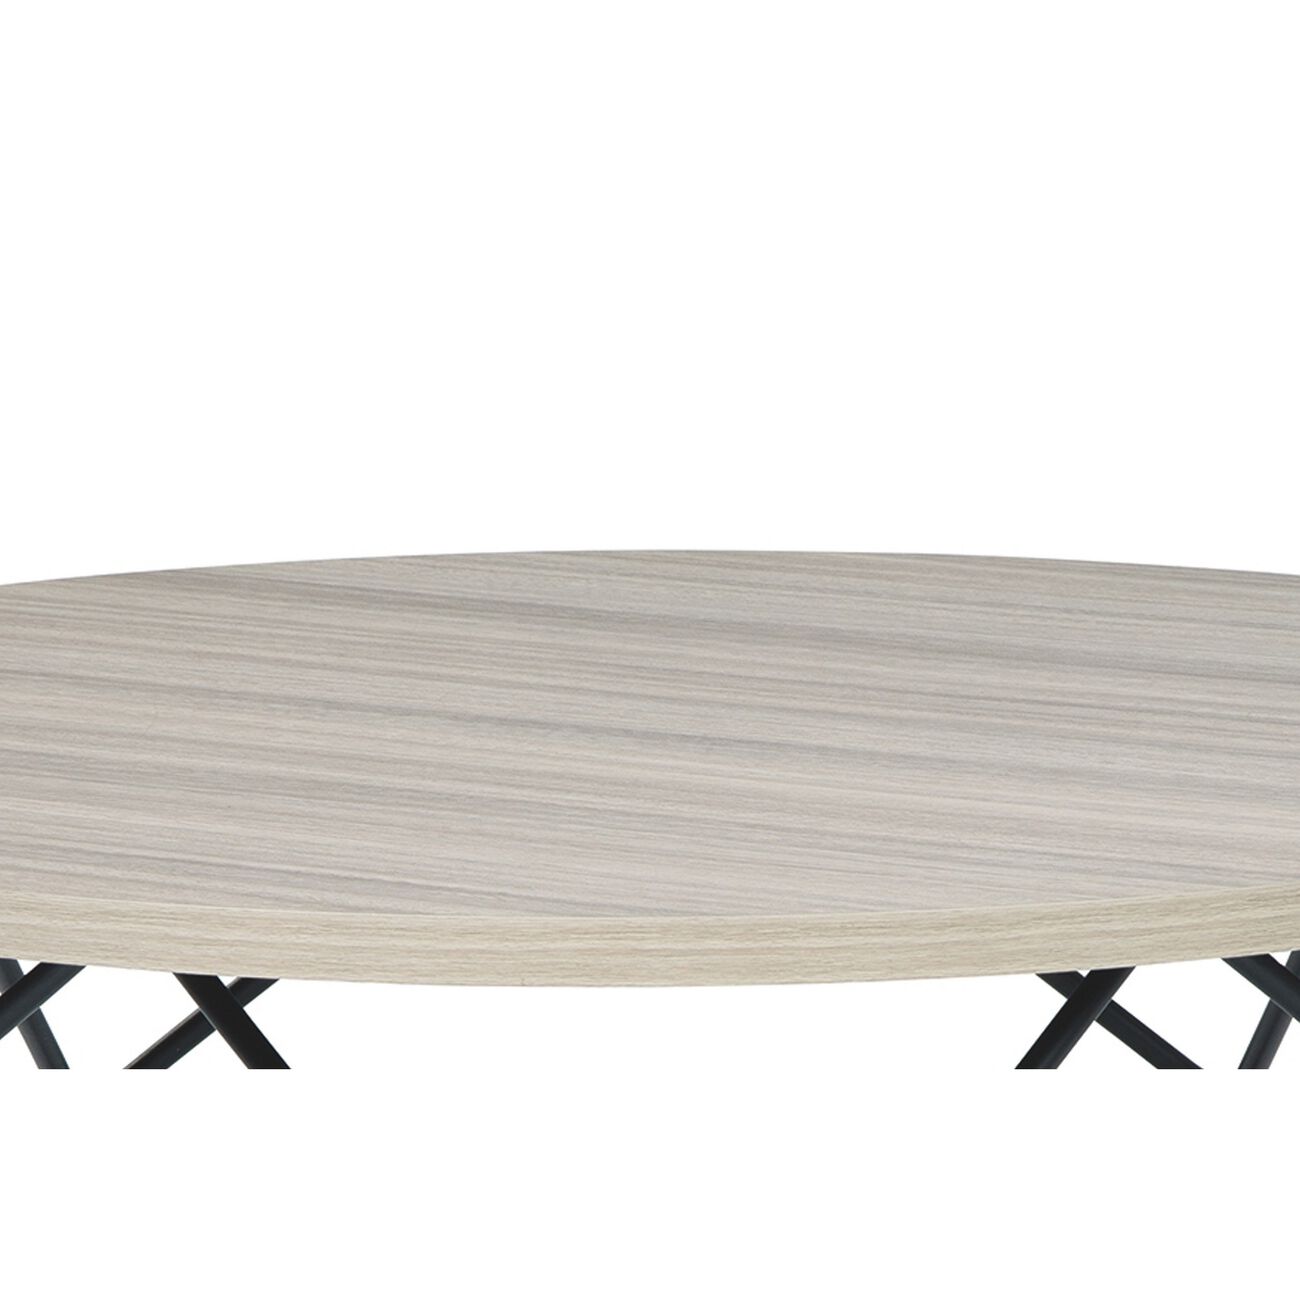 Wooden Top Round Cocktail Table with Open Geometric Base, Gray and Black